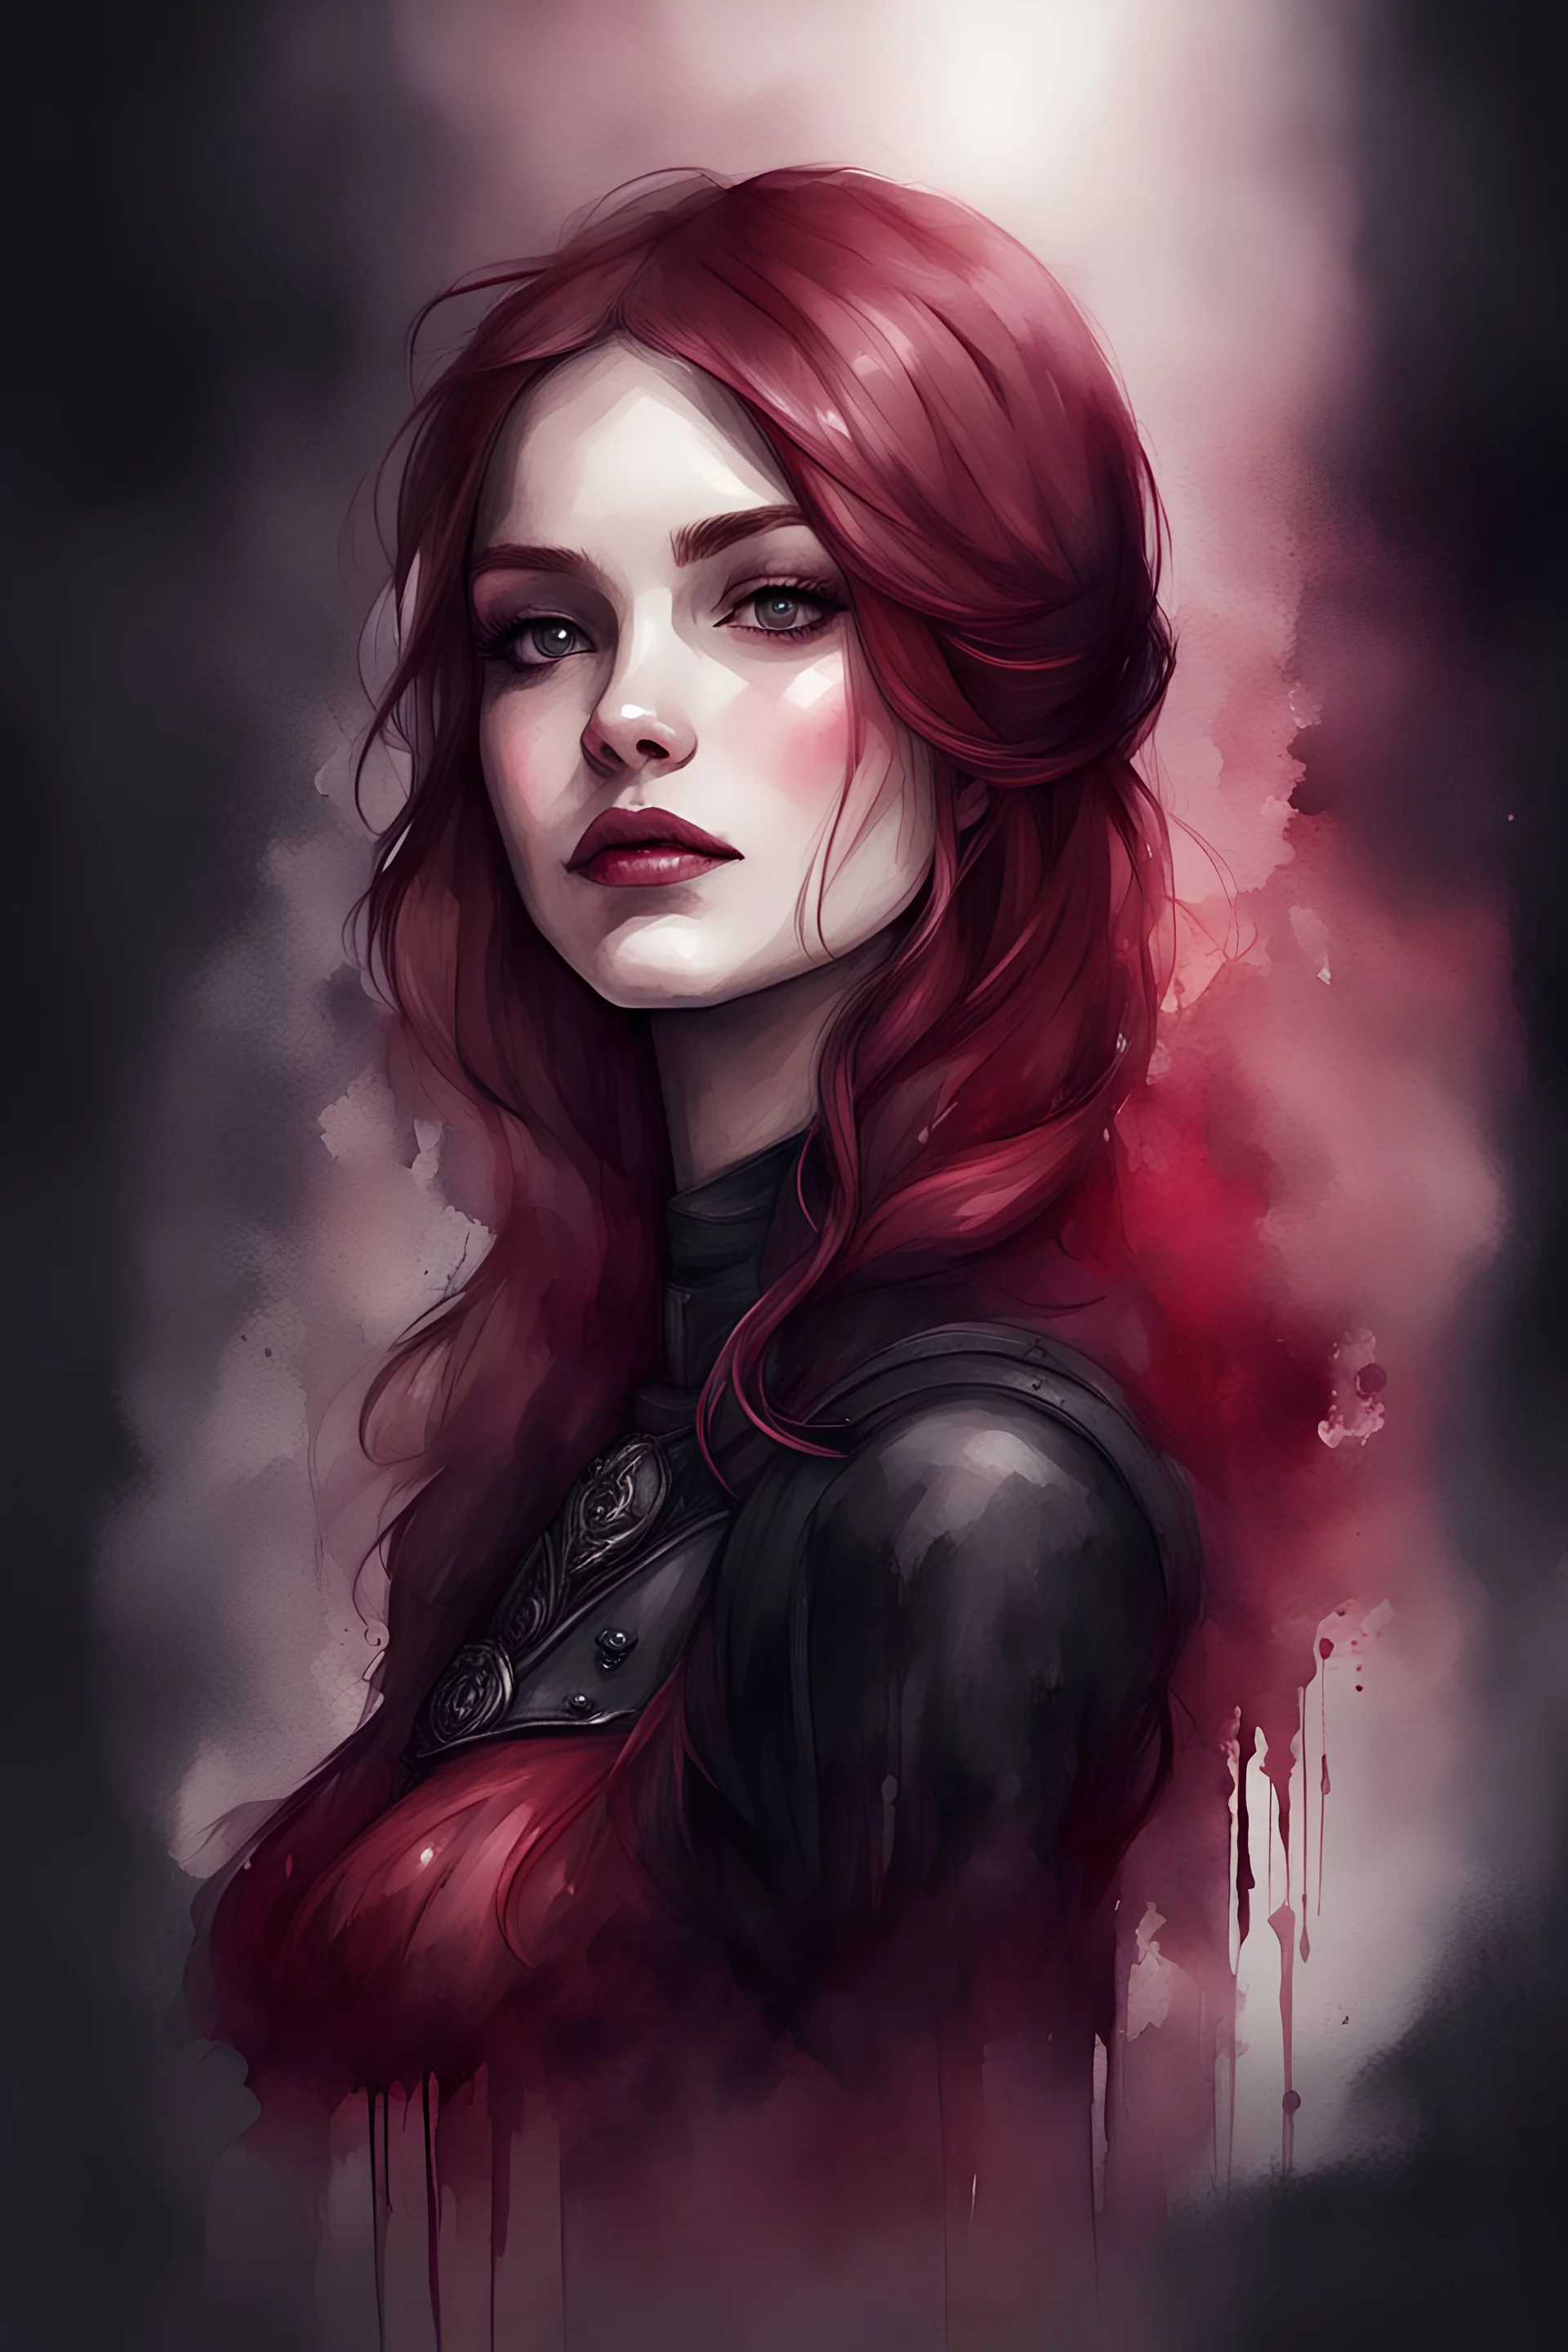 watercolor burgundy and black gothic objects, Trending on Artstation, {creative commons}, fanart, AIart, {Woolitize}, by Charlie Bowater, Illustration, Color Grading, Filmic, Nikon D750, Brenizer Method, Side-View, Perspective, Depth of Field, Field of View, F/2.8, Lens Flare, Tonal Colors, 8K, Full-HD, ProPhoto RGB, Perfectionism, Rim Lighting, Natural Lighting, Soft Lighting, Accent Lighting, Diffraction Grading, With Imperfections